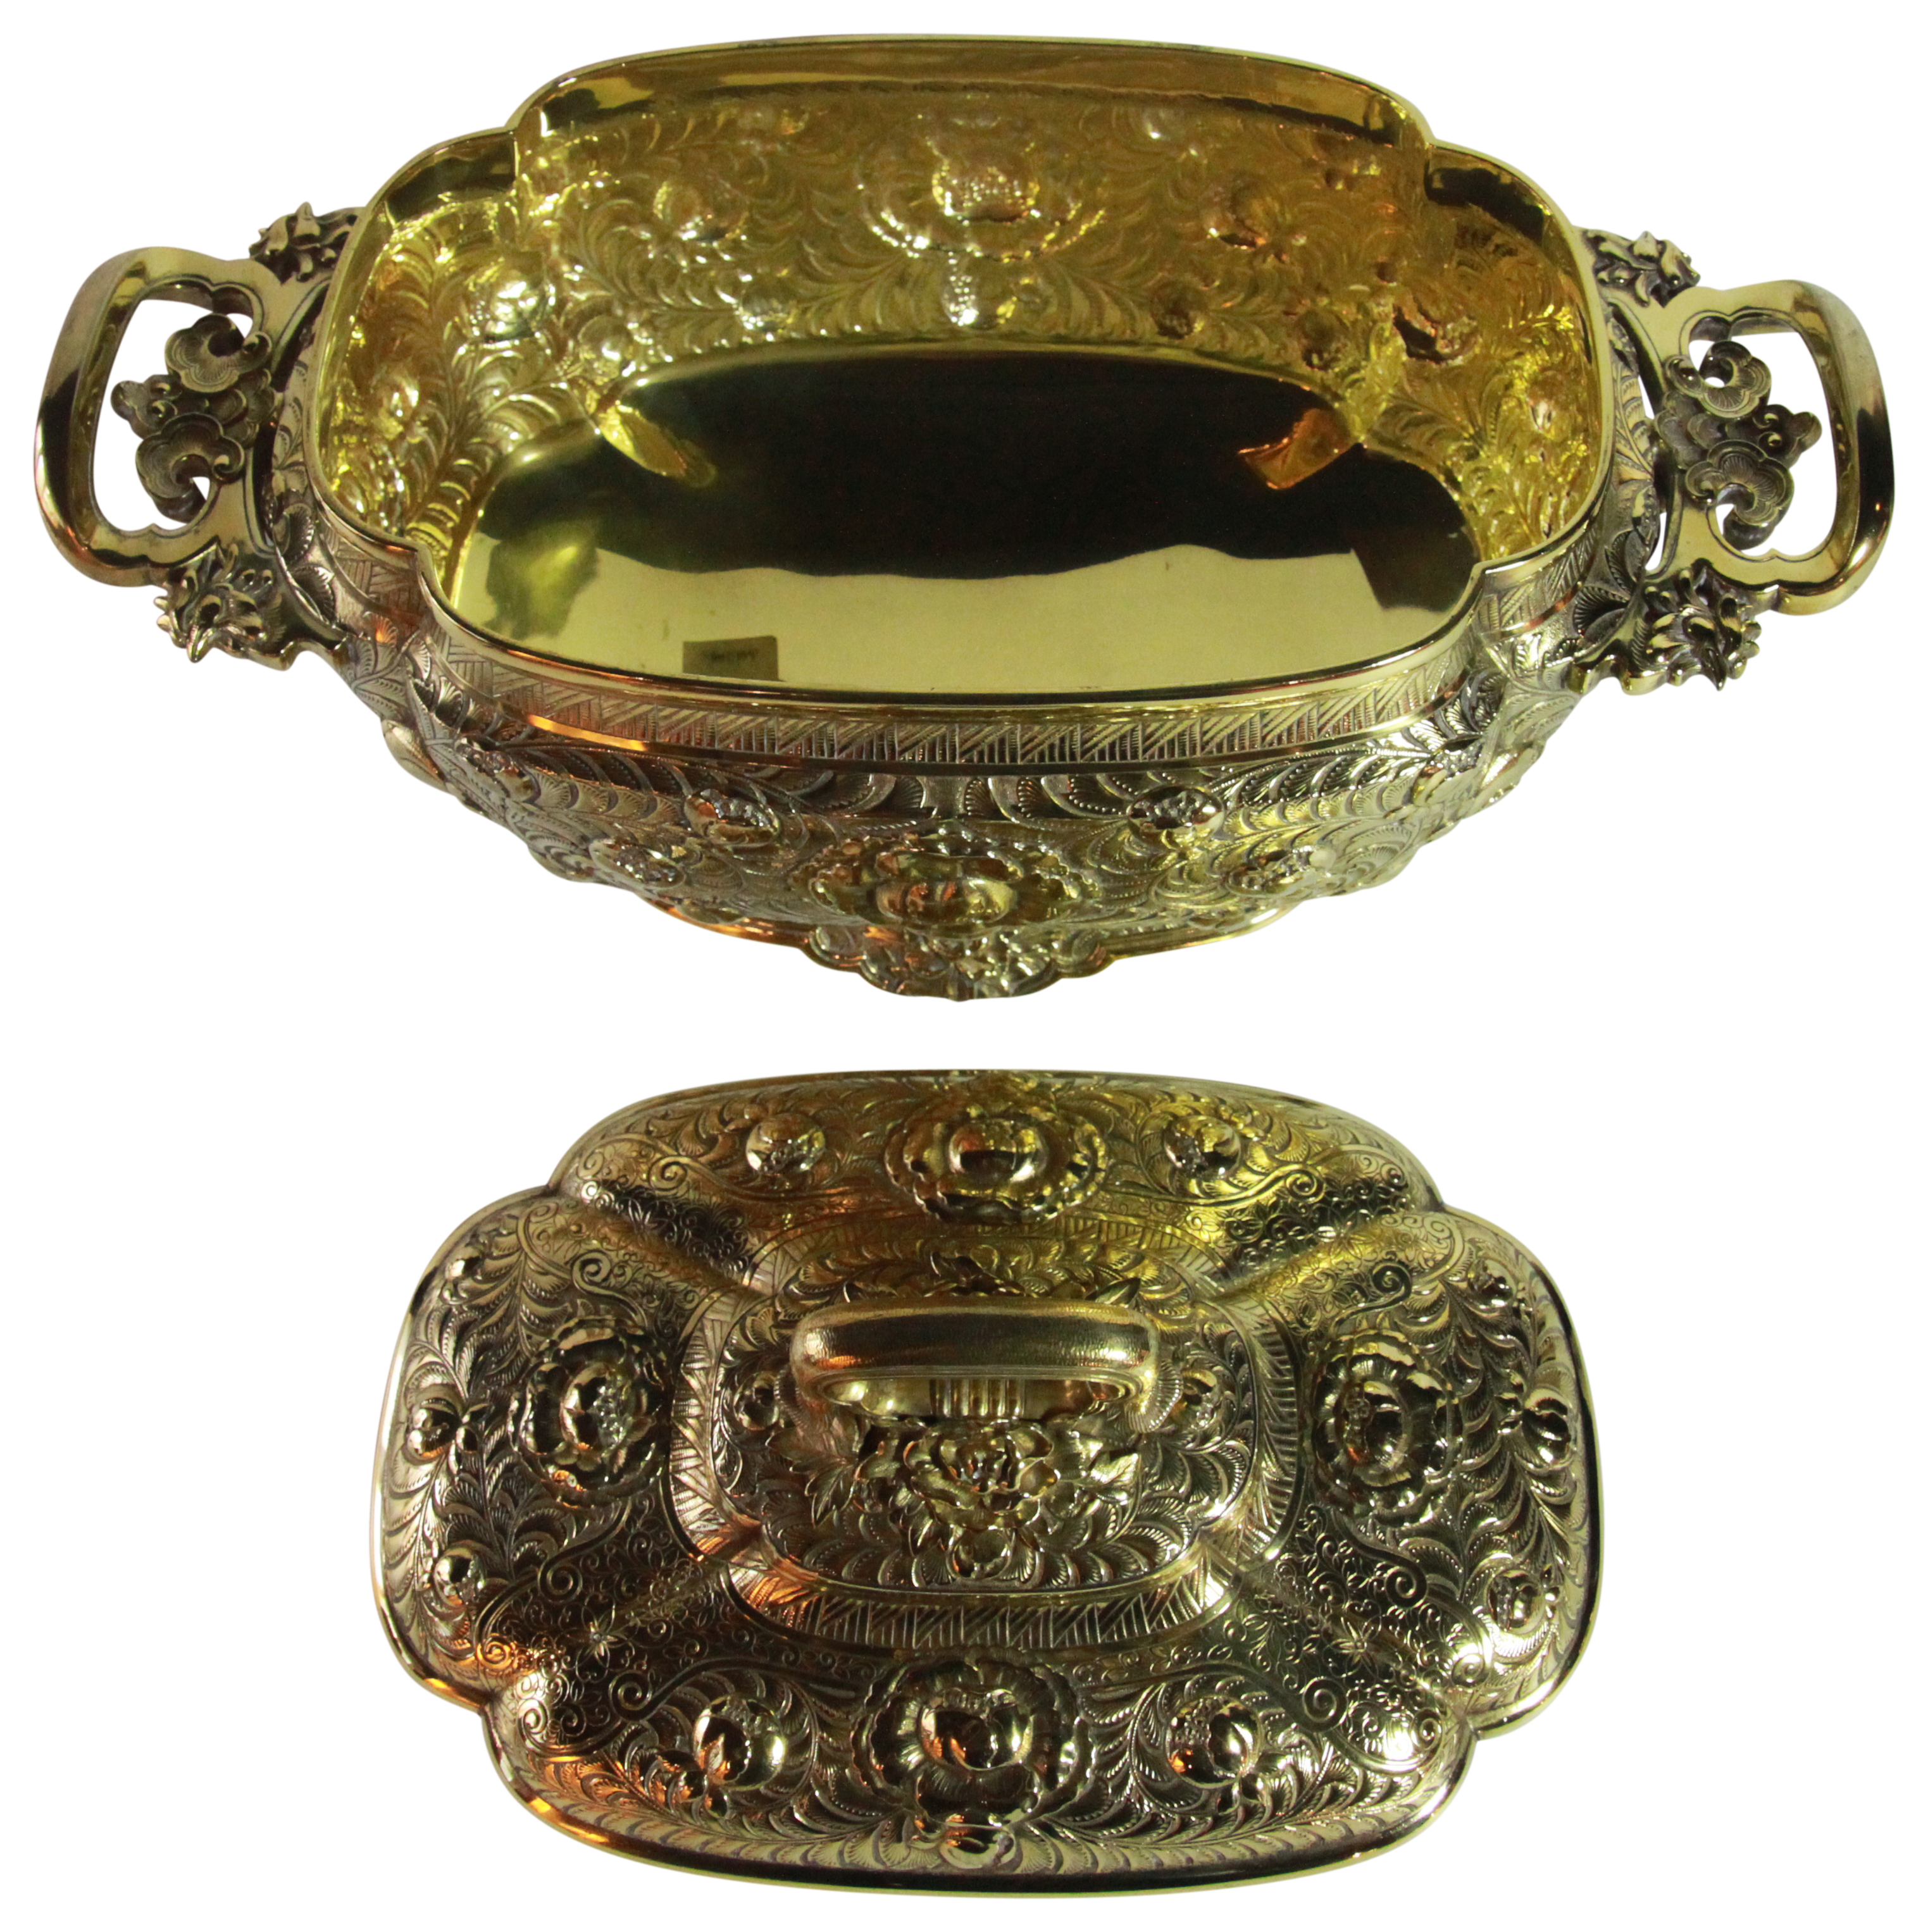 A superb American silver gilt tureen & cover decorated in the Chinese Chippendale taste amongst - Image 2 of 6